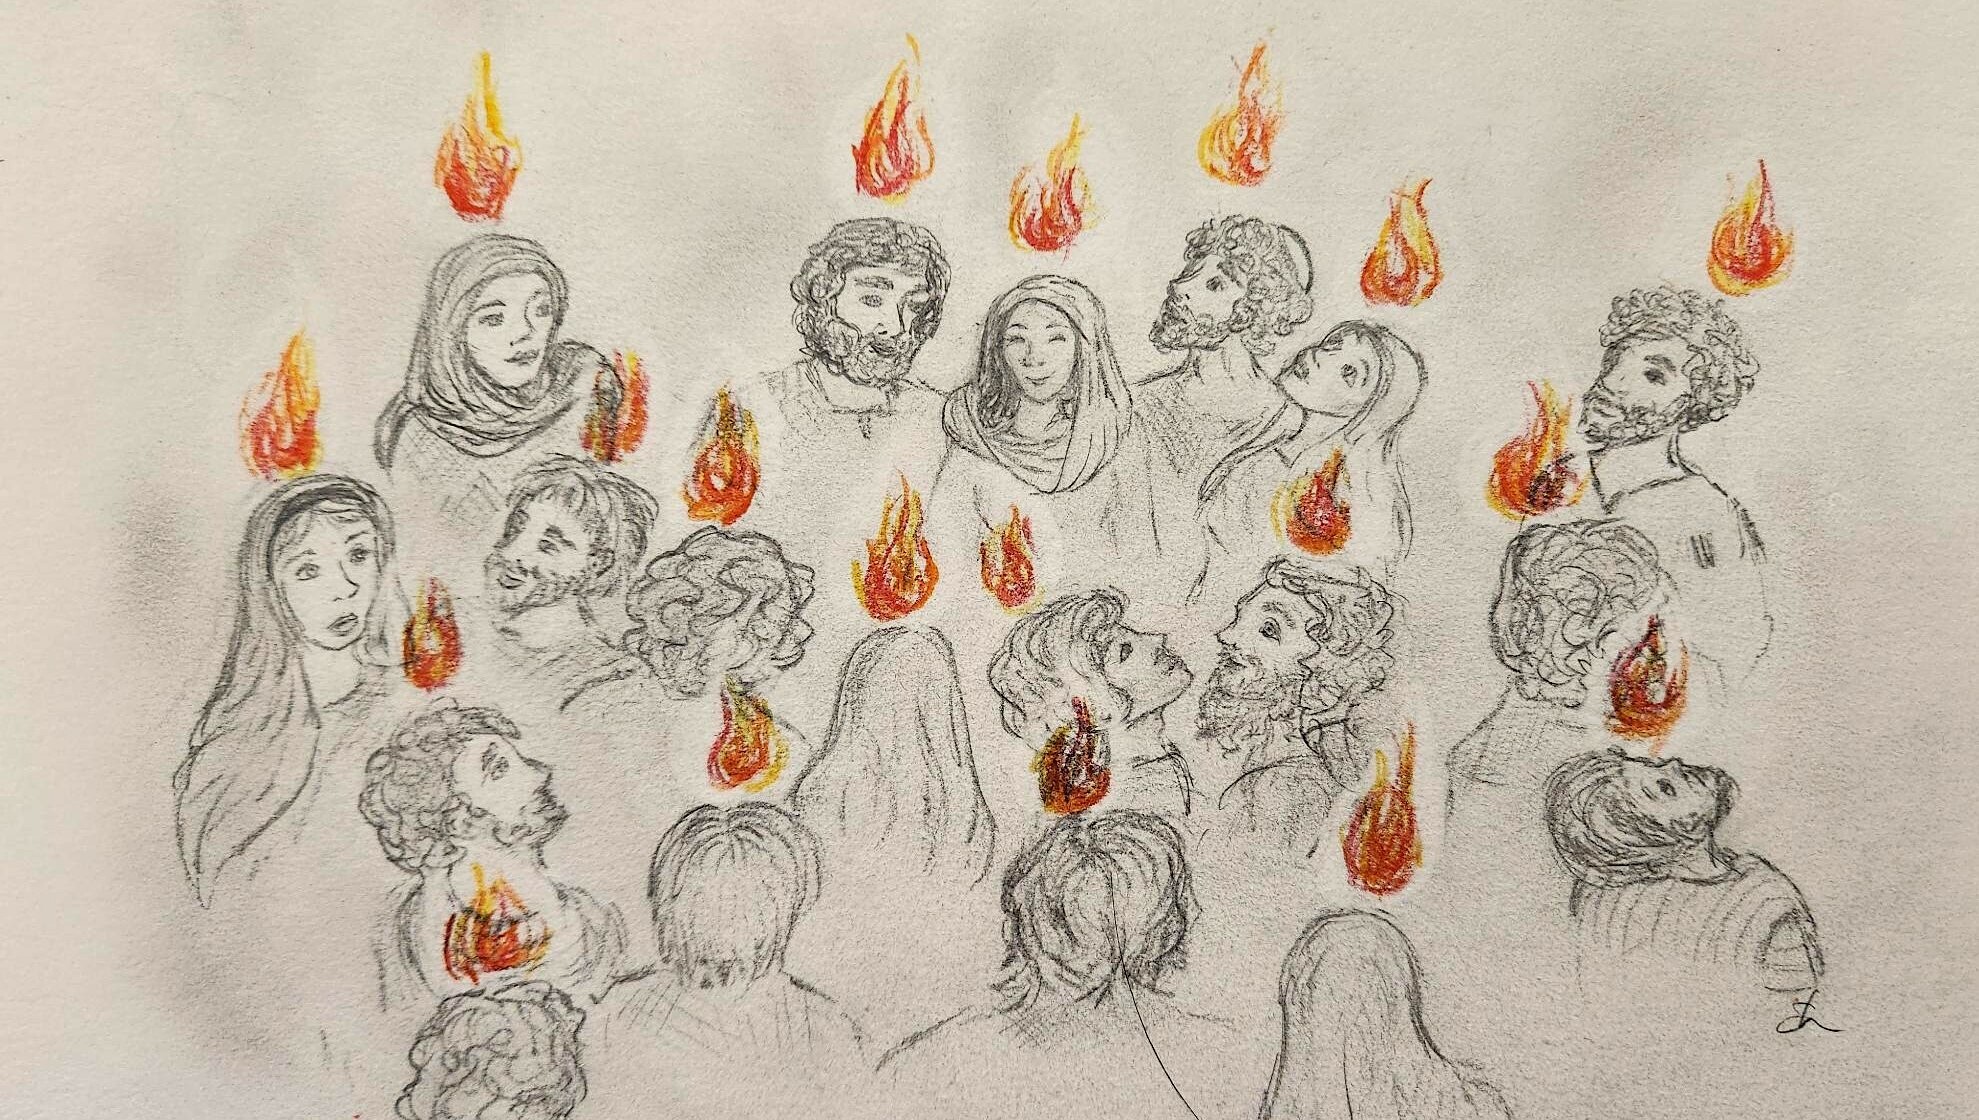 drawing of a large group of men and women with flames over their heads